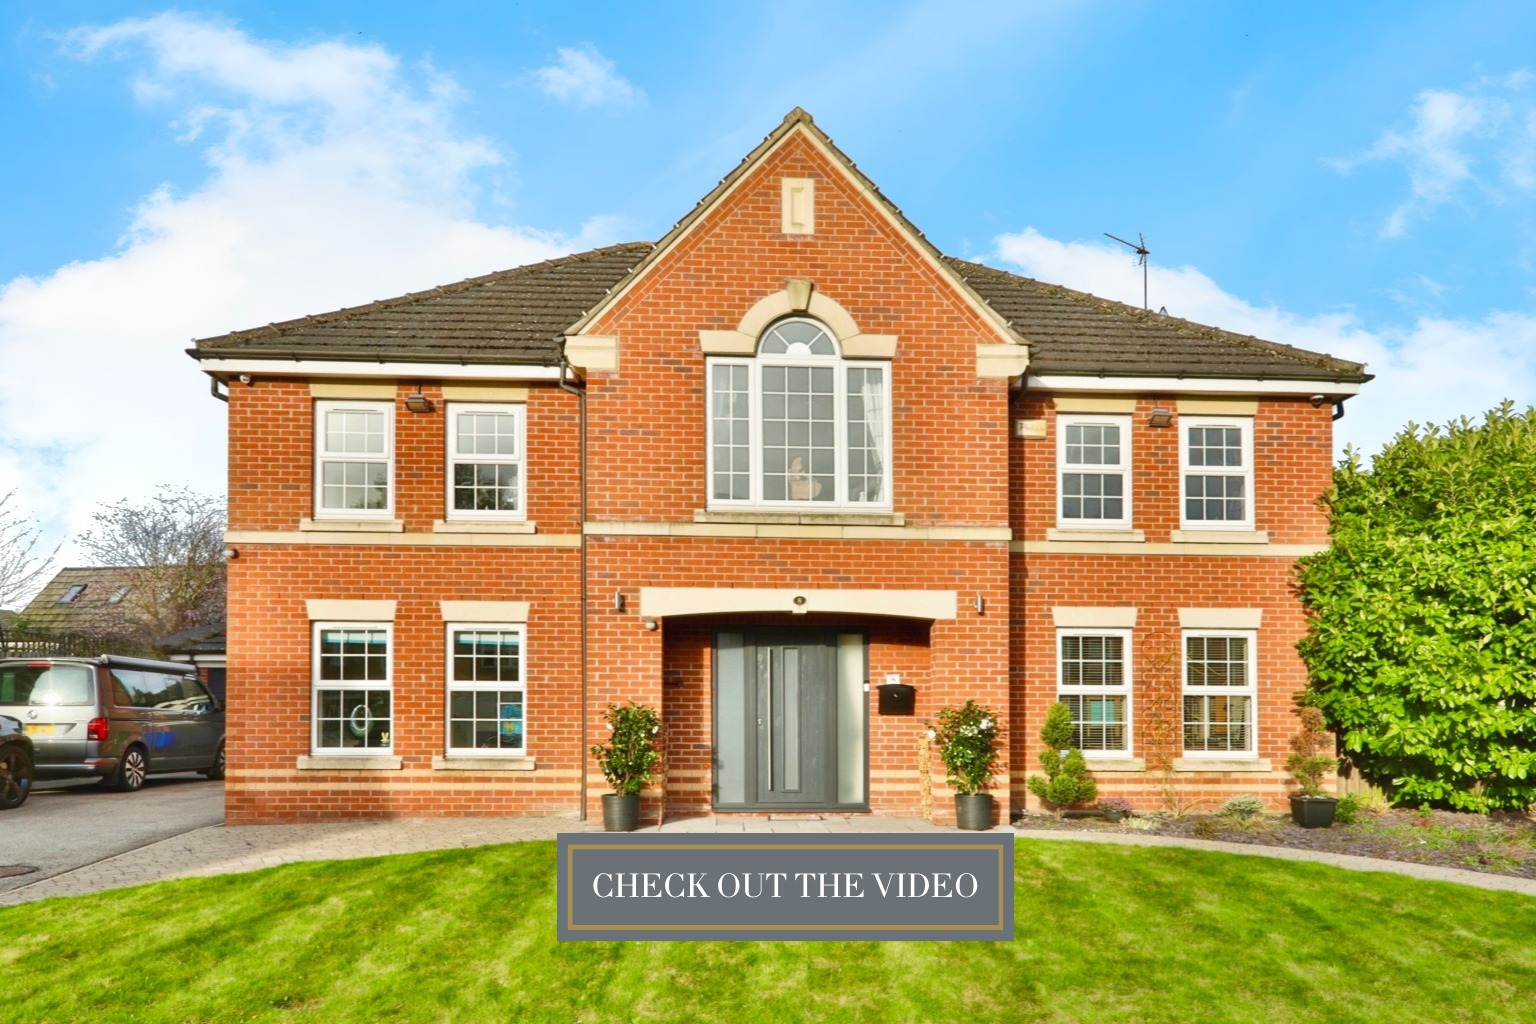 5 bed detached house for sale in Carlton, Brough  - Property Image 1